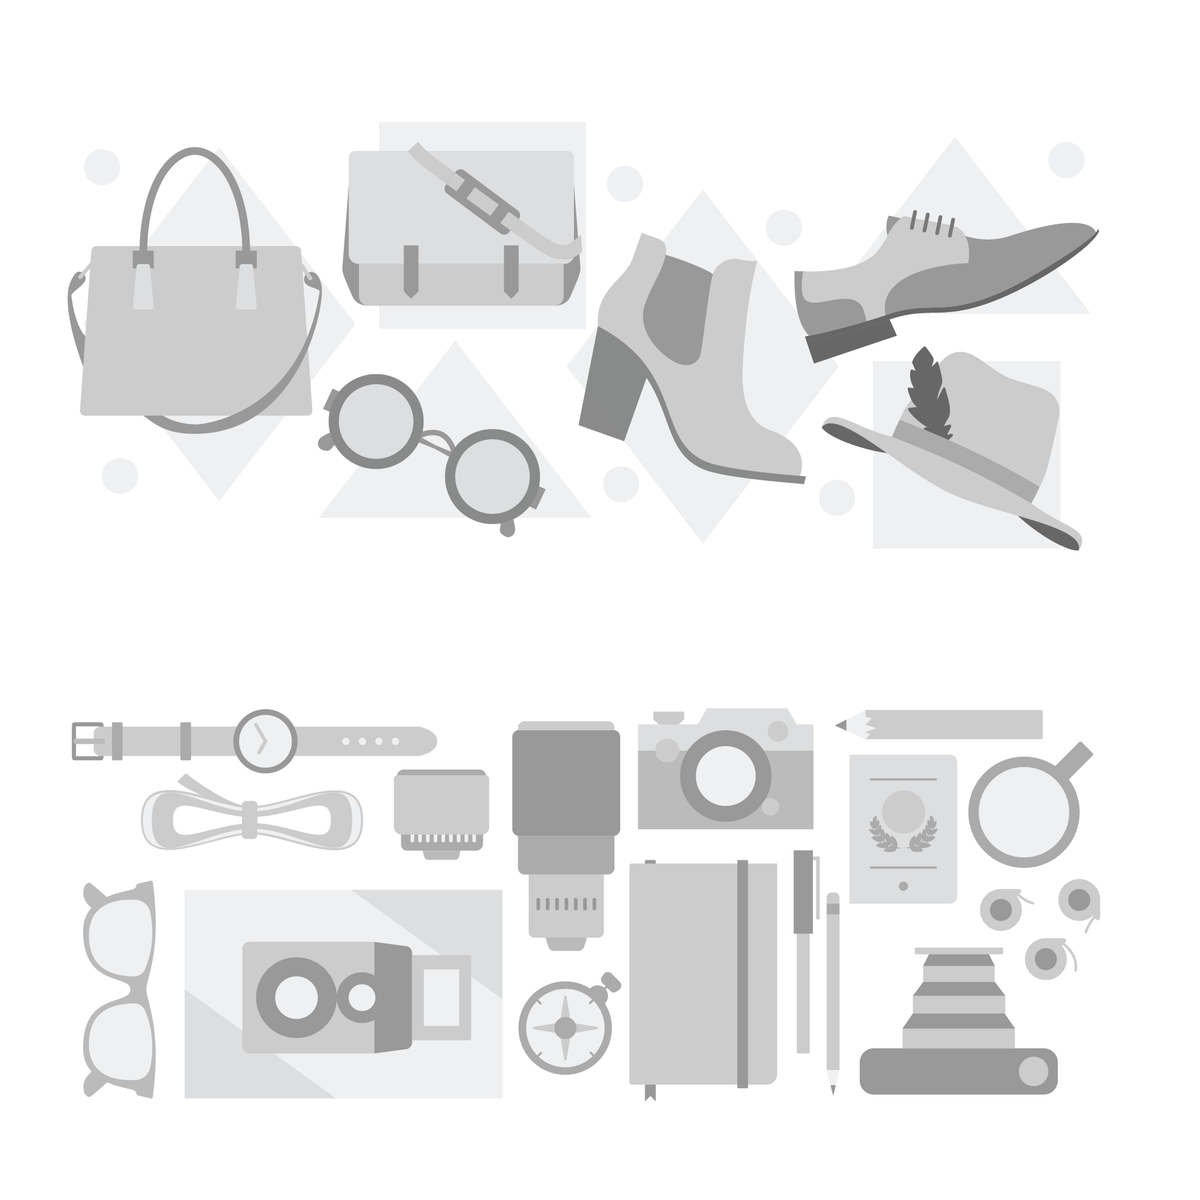 Greyscale vector images for lifestyle heros.